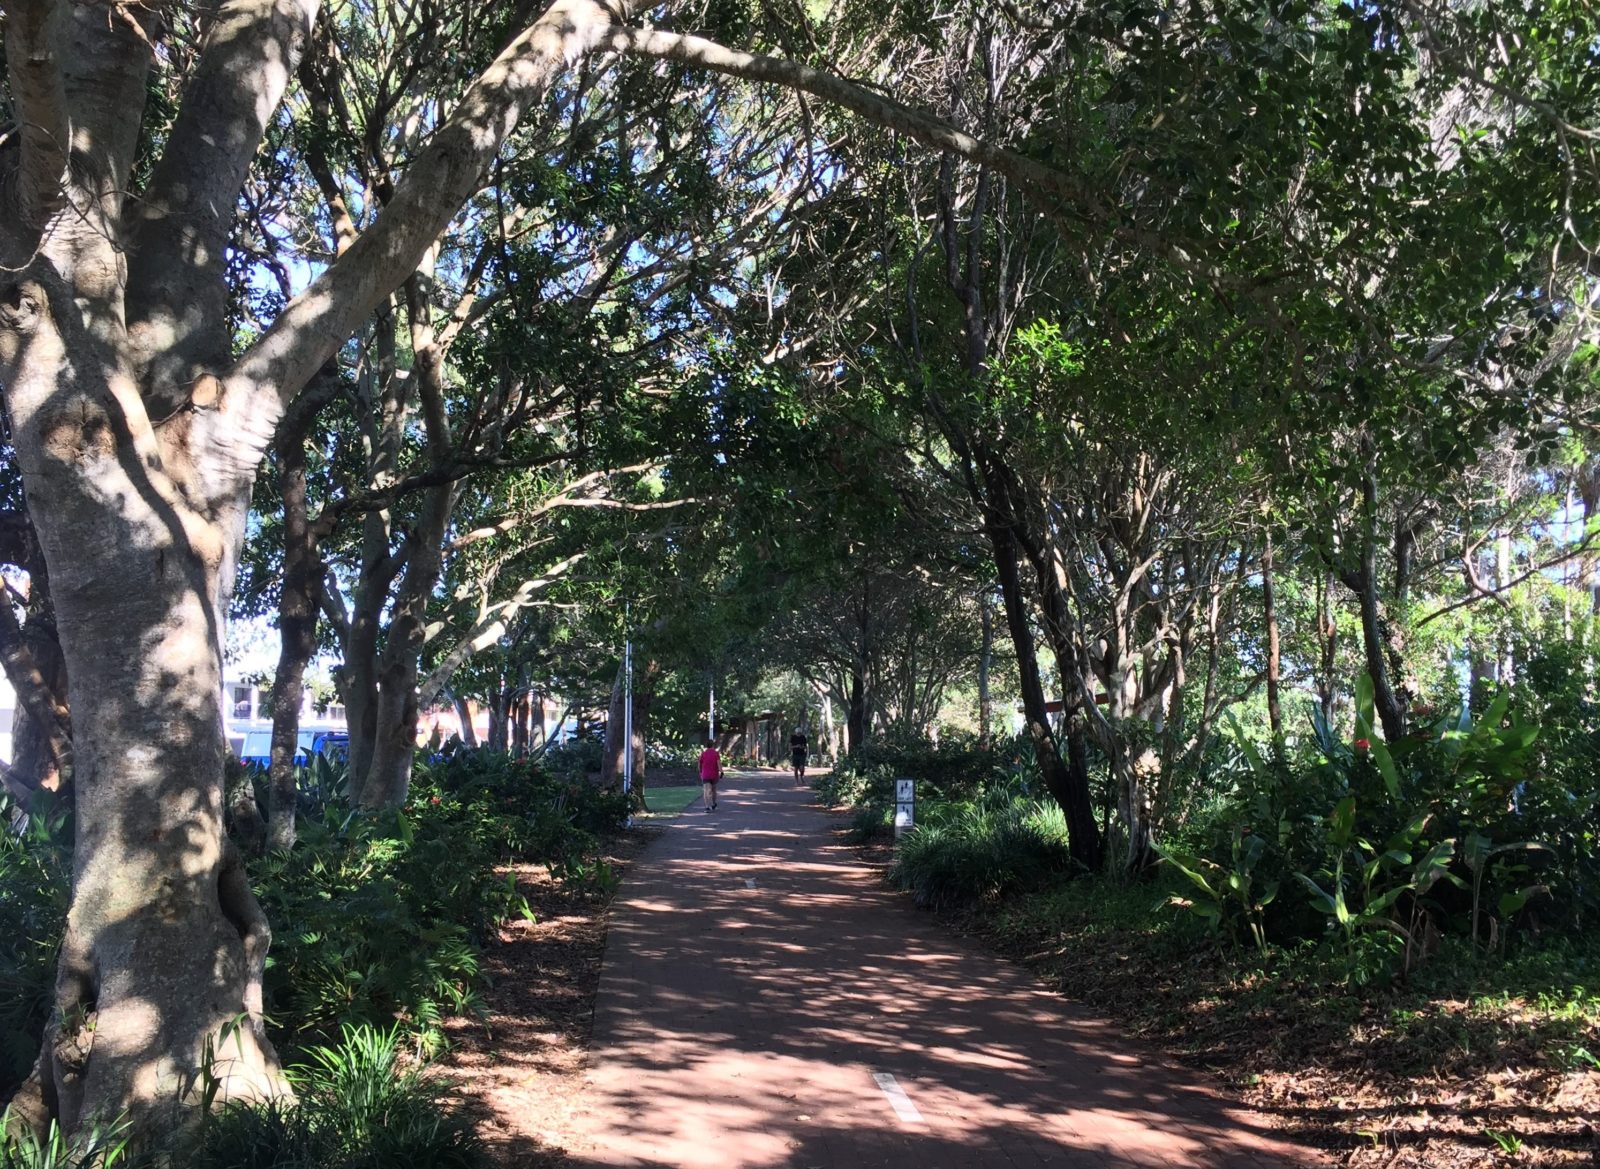 photo showing part of the Hervey Bay coastal bikepath running through trees and gardens